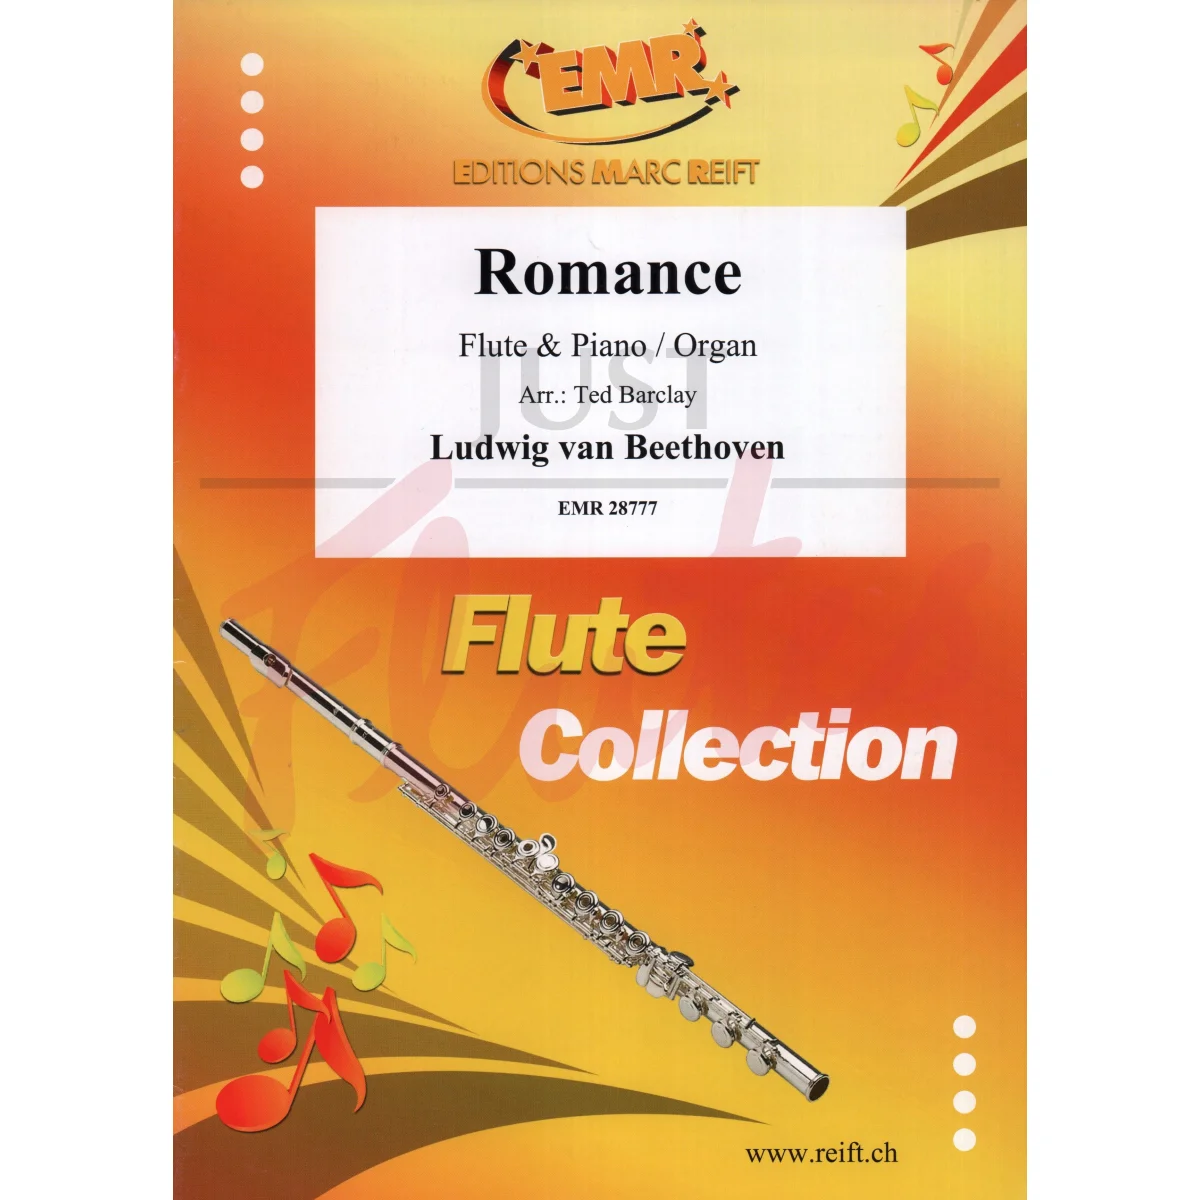 Romance for Flute and Piano/Organ